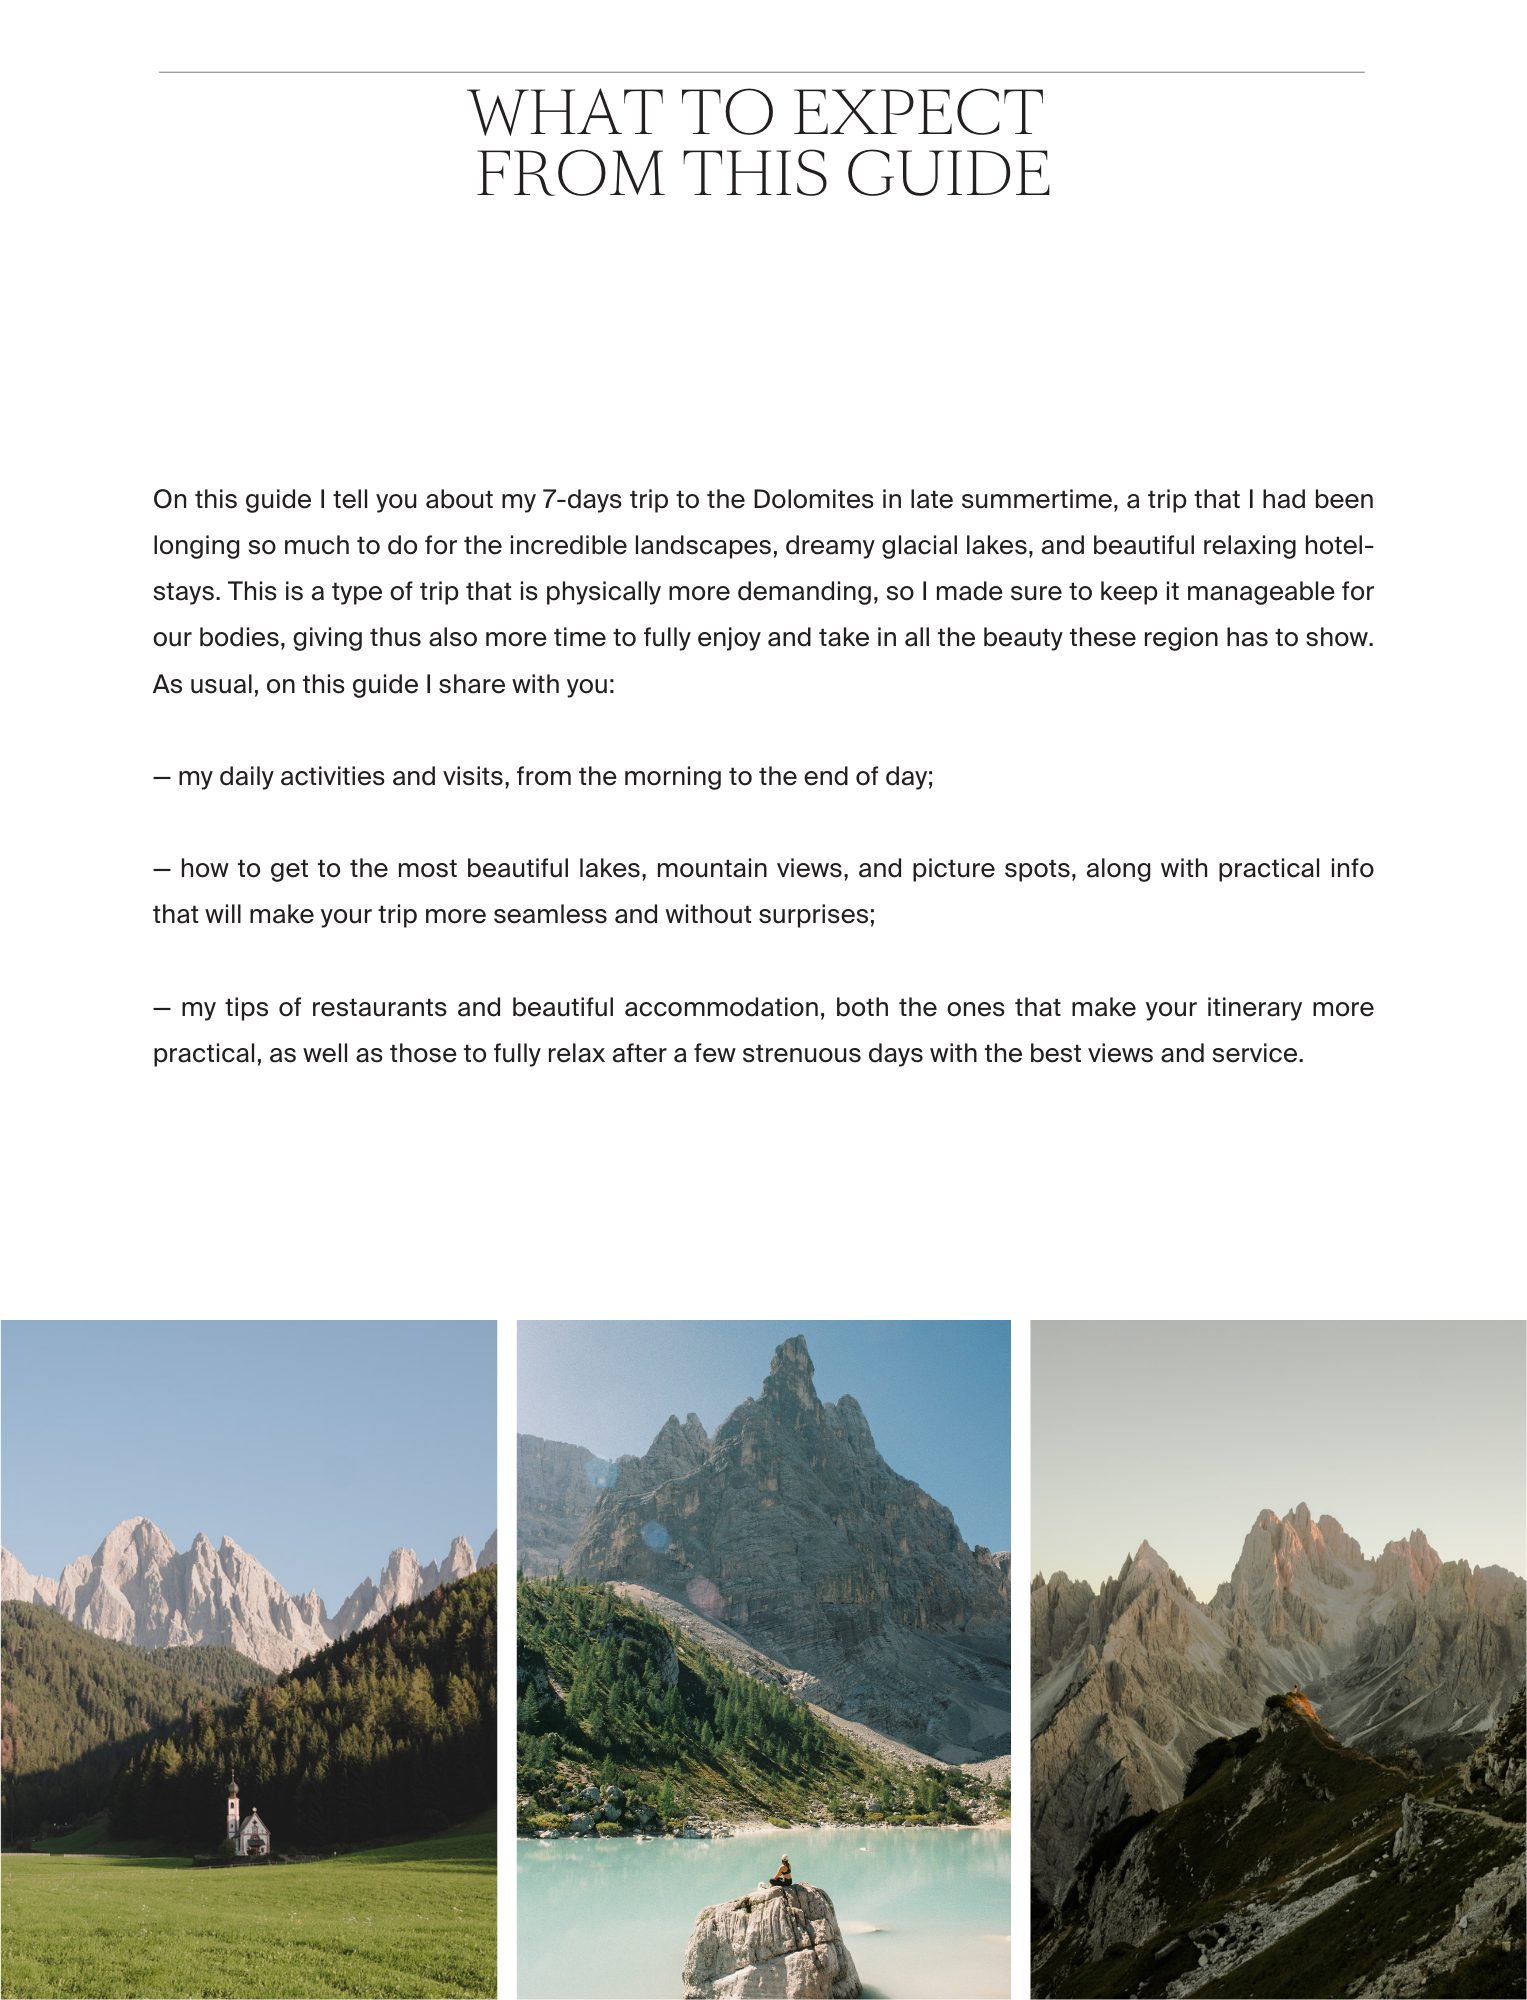 A Guide to the Dolomites - the 'What to Expect' page, by Simply Slow Traveler